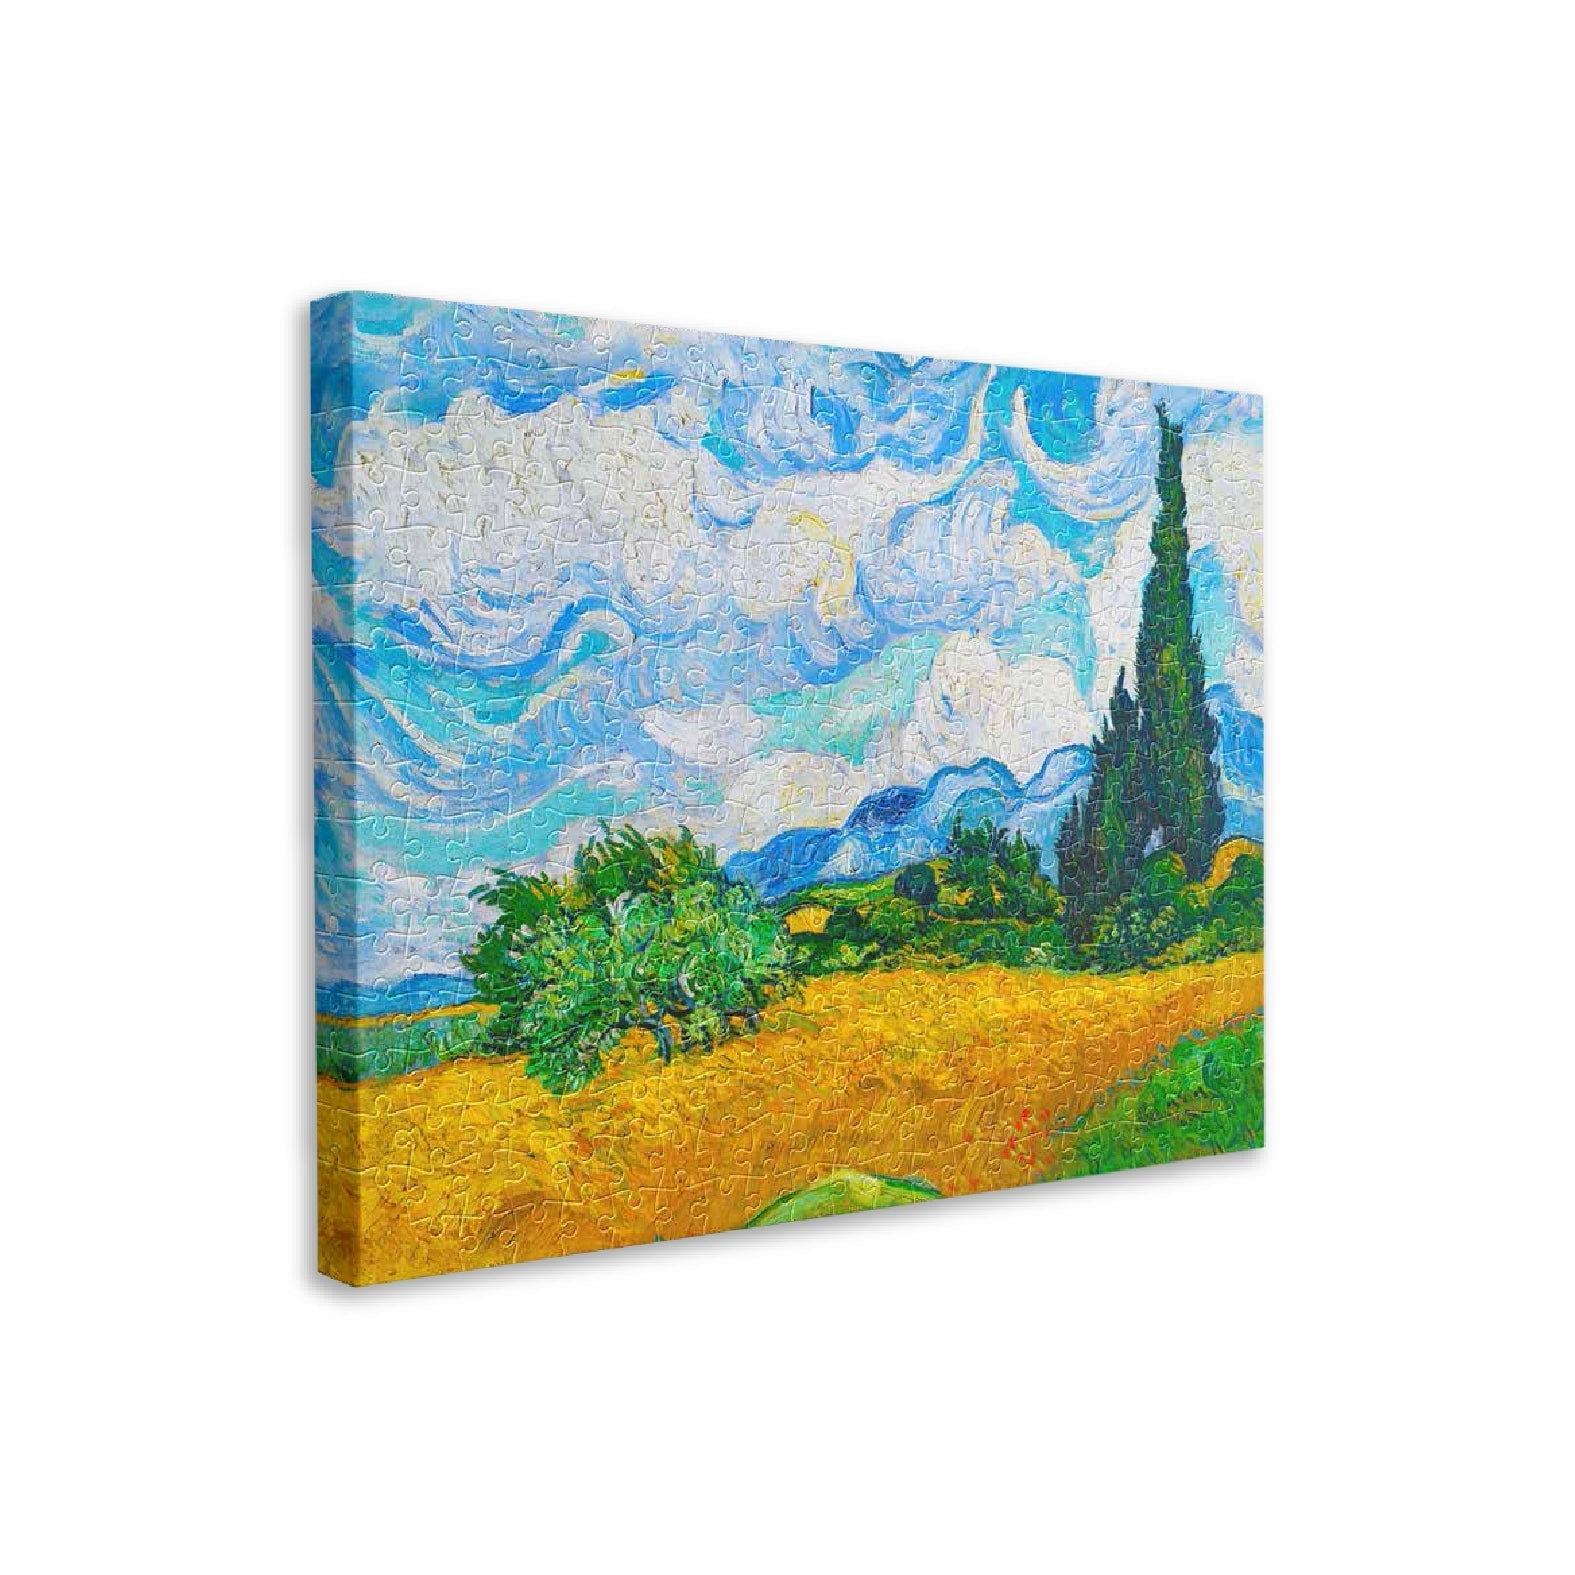 Wheat Field with Cypresses - 366 Piece Jigsaw Puzzle